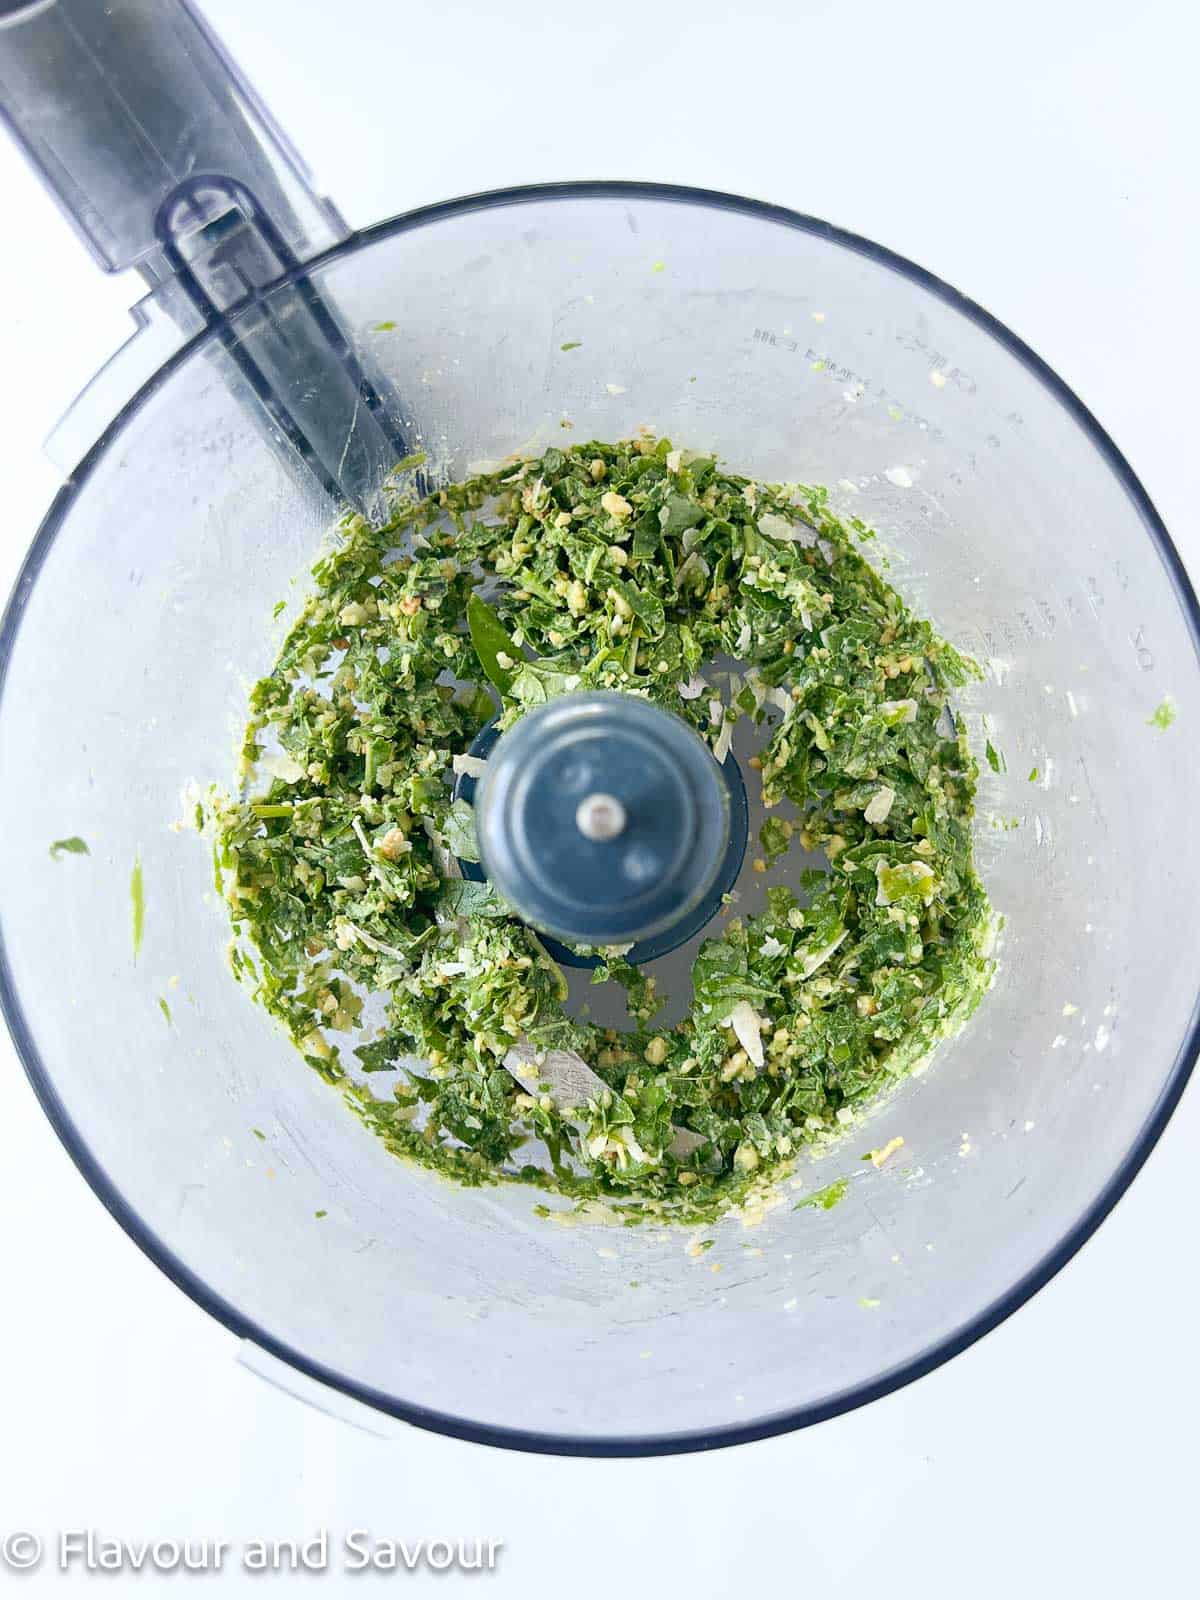 Finely chopped pesto ingredients in a food processor bowl.